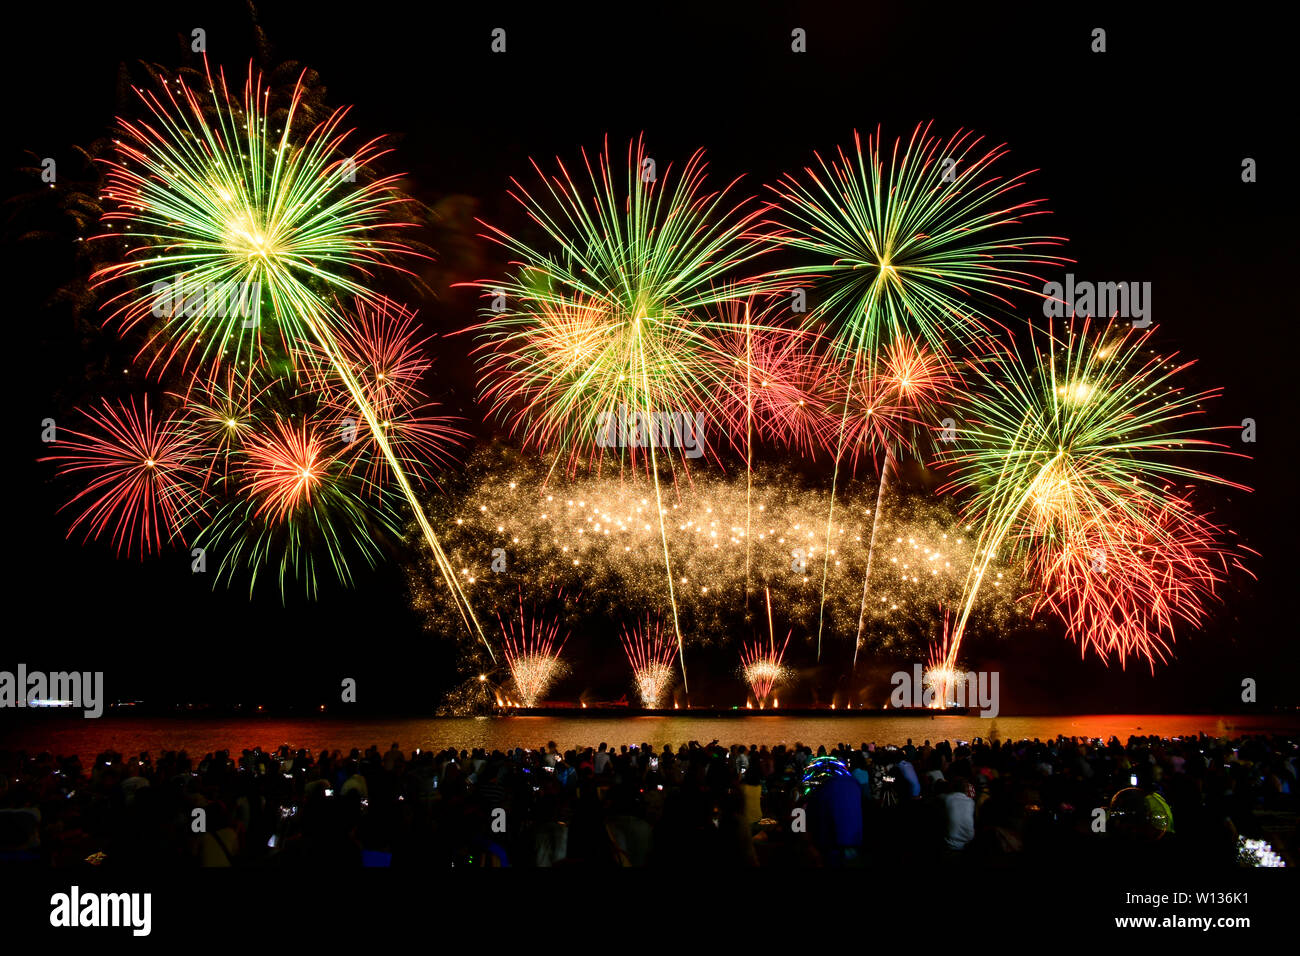 Colorful fireworks celebration and the night sky background with crowded people on the beach. Stock Photo